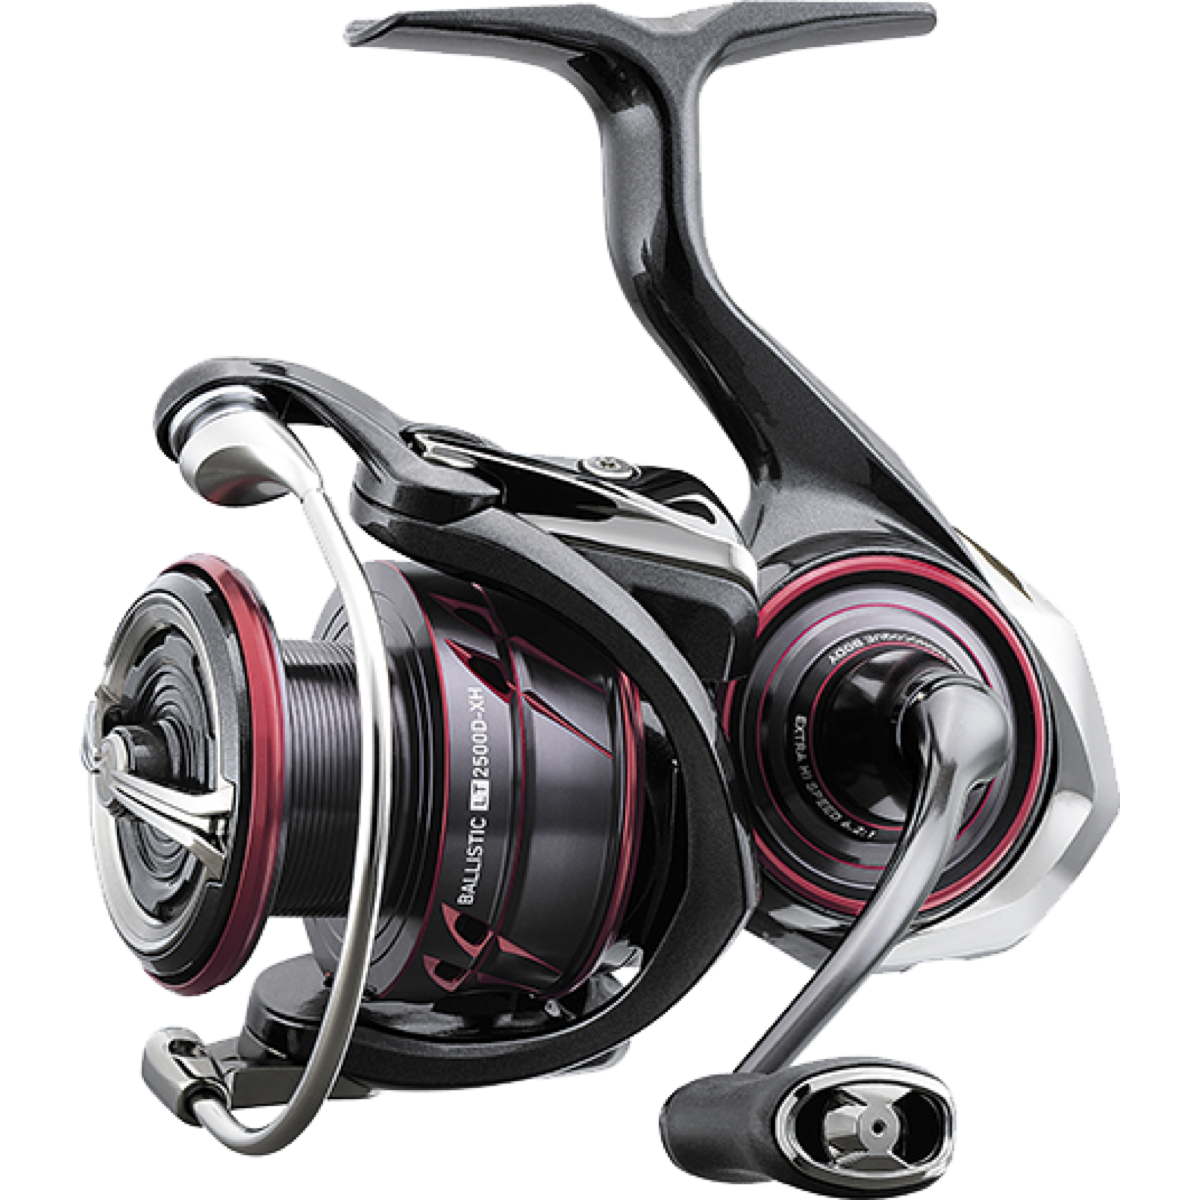 Photo of Daiwa Ballistic MQ LT Spinning Reel for sale at United Tackle Shops.